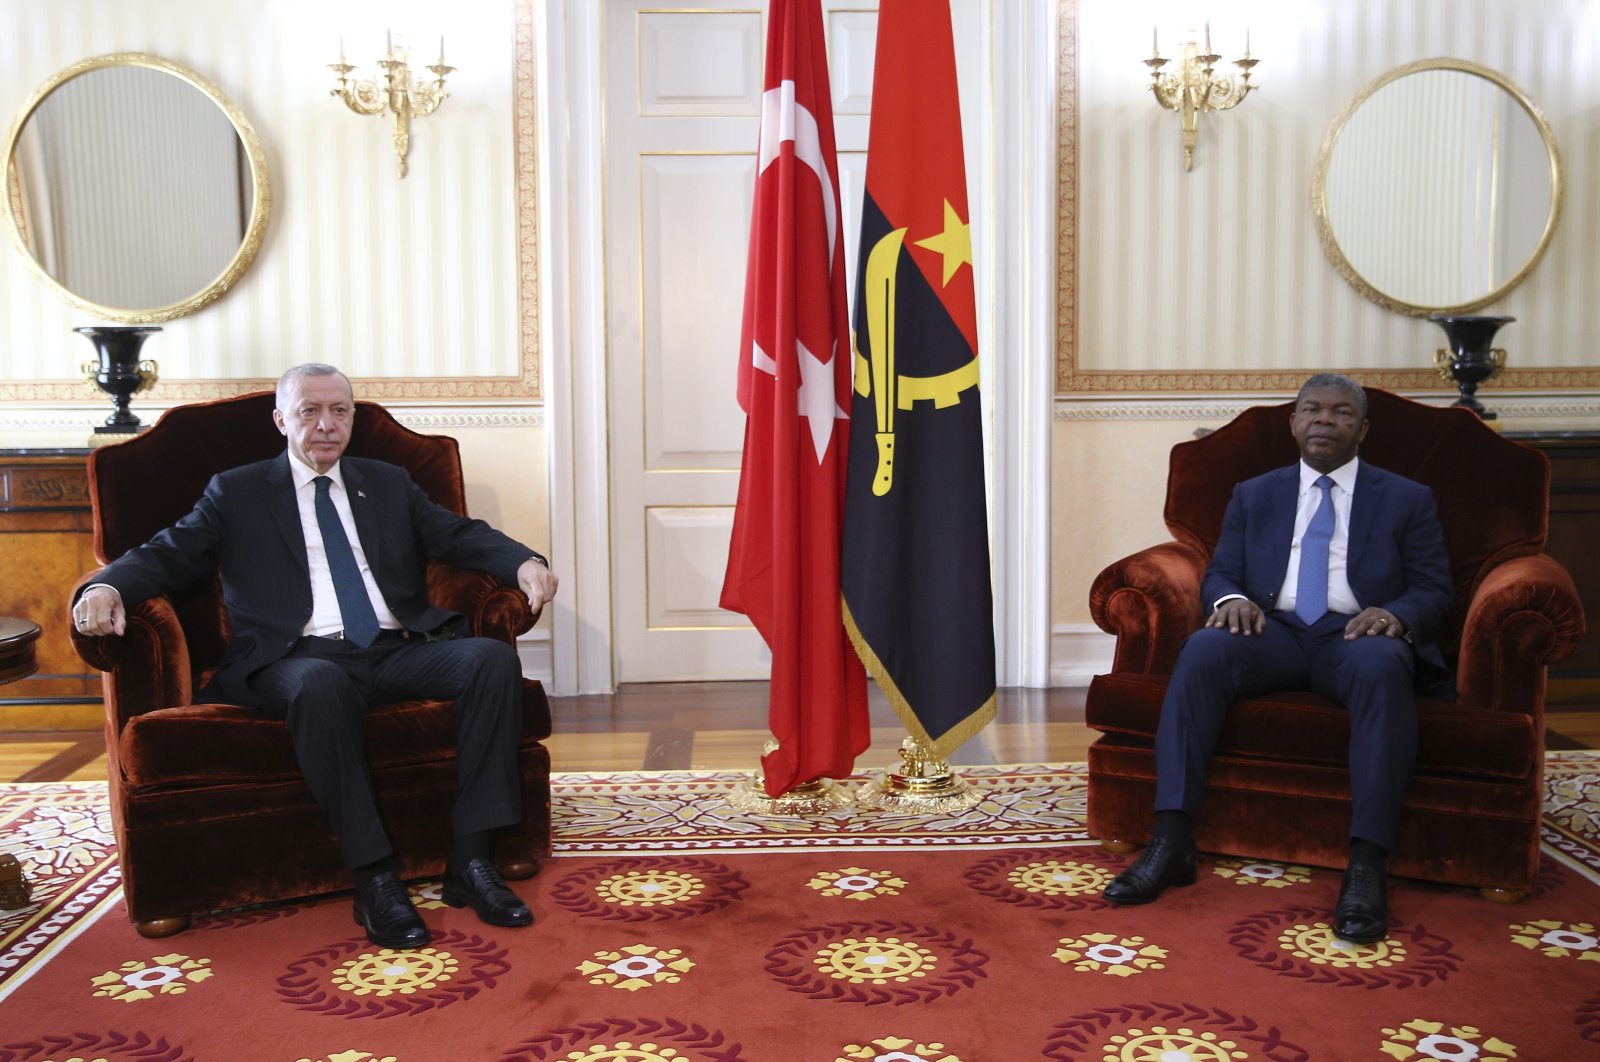 President Recep Tayyip Erdoğan (L) and Angolan President Joao Lourenco during their meeting at the Presidential Palace in Luanda, Angola, Oct. 18, 2021. (EPA Photo)